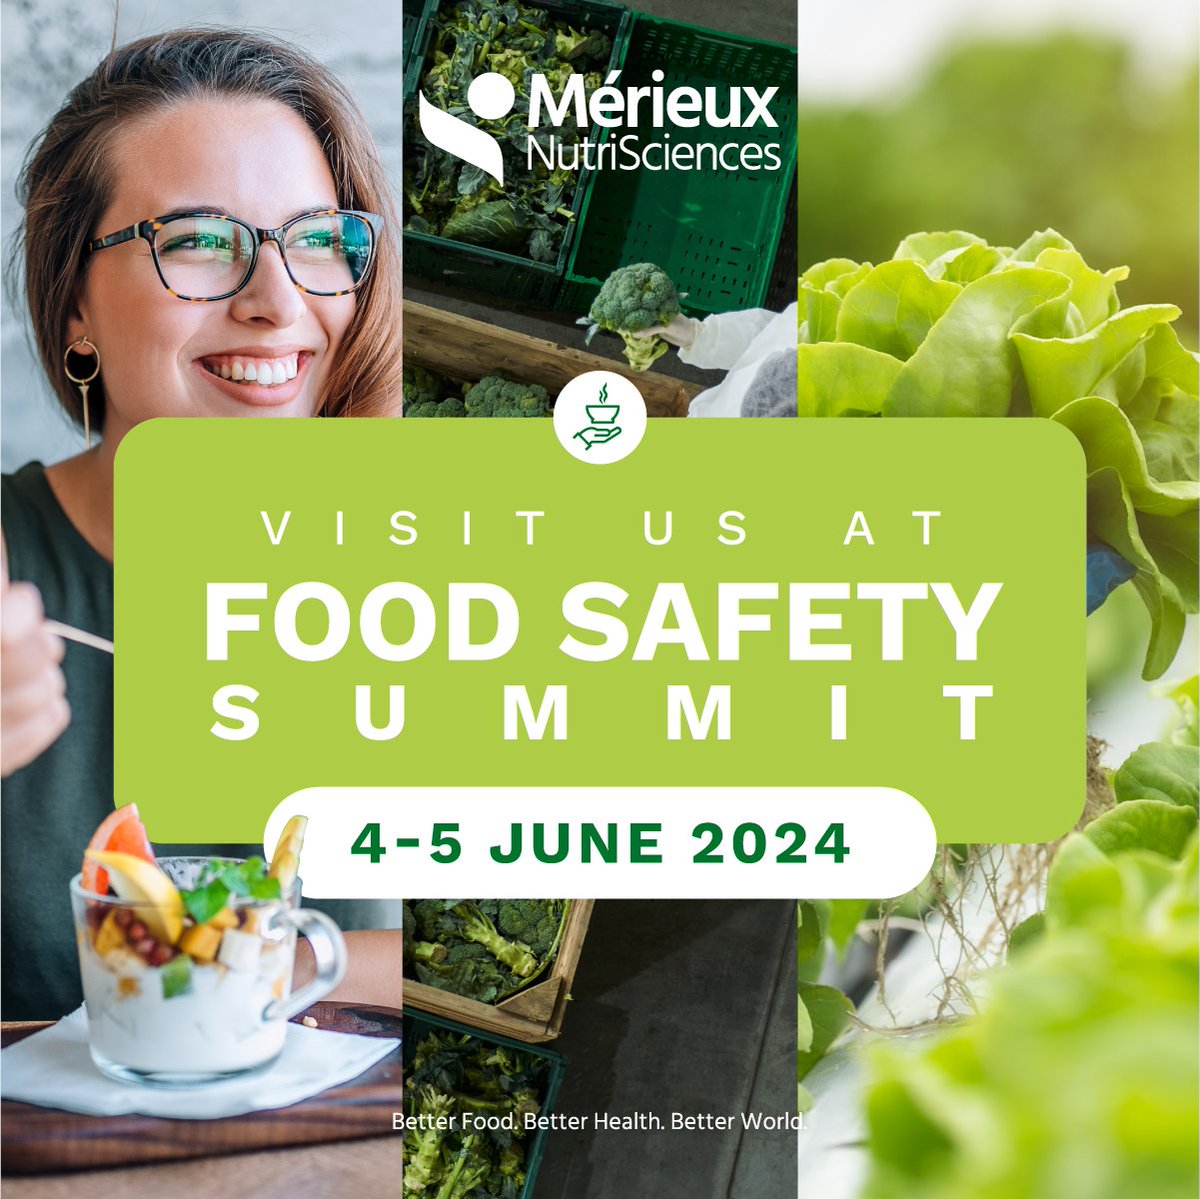 Better Food. Better Health. Better World. 
With local care and global reach, our Silver Sponsor @mxns_sa is here to provide food safety, quality and sustainability solutions. Find out more here - bit.ly/3QAEja5

#BetterFood #BetterHealth #FoodSafety